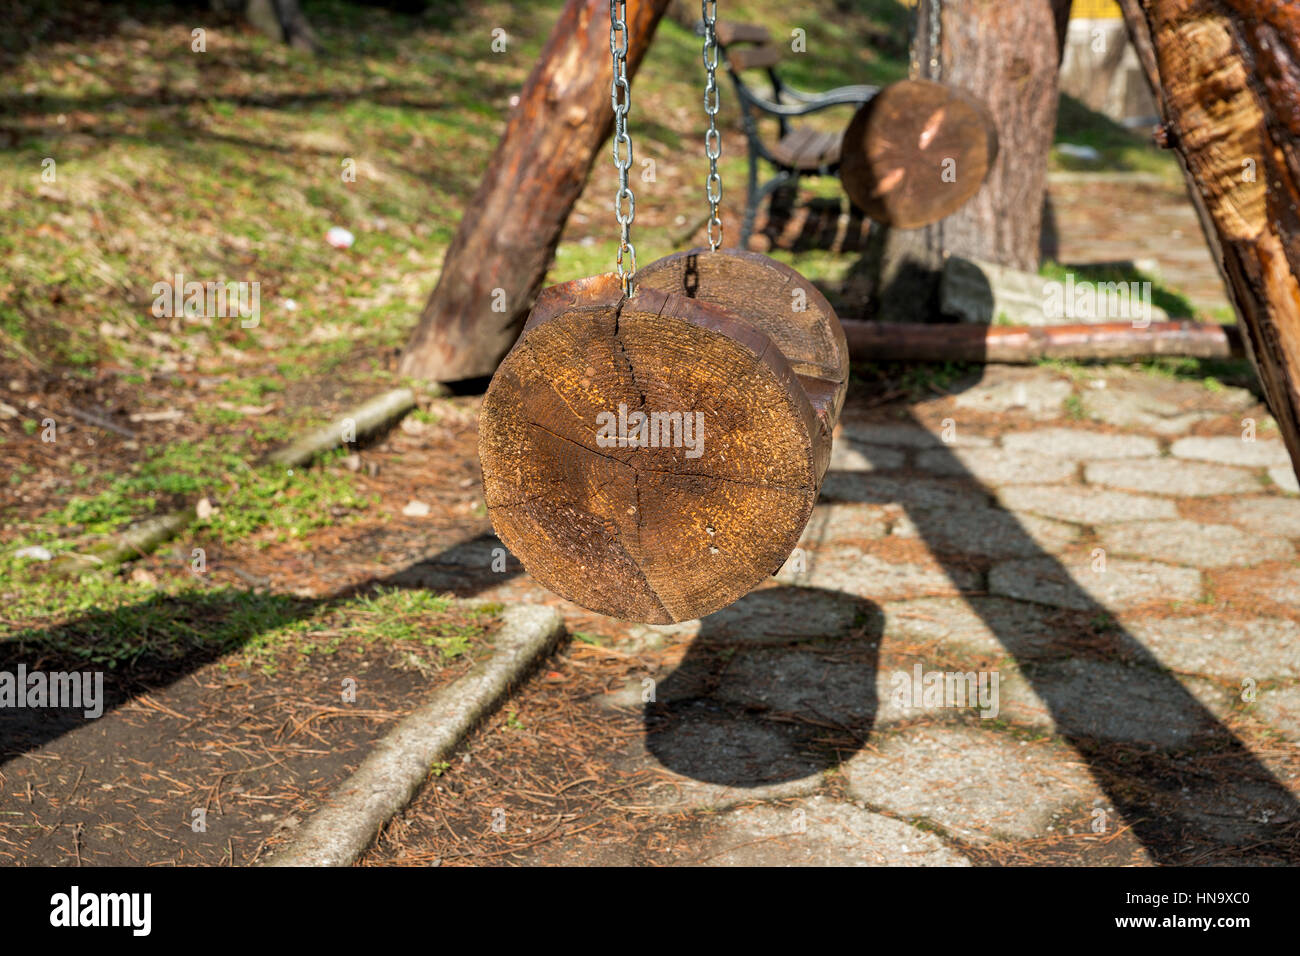 The seat of a swing made of tree trunks hung on chains Stock Photo